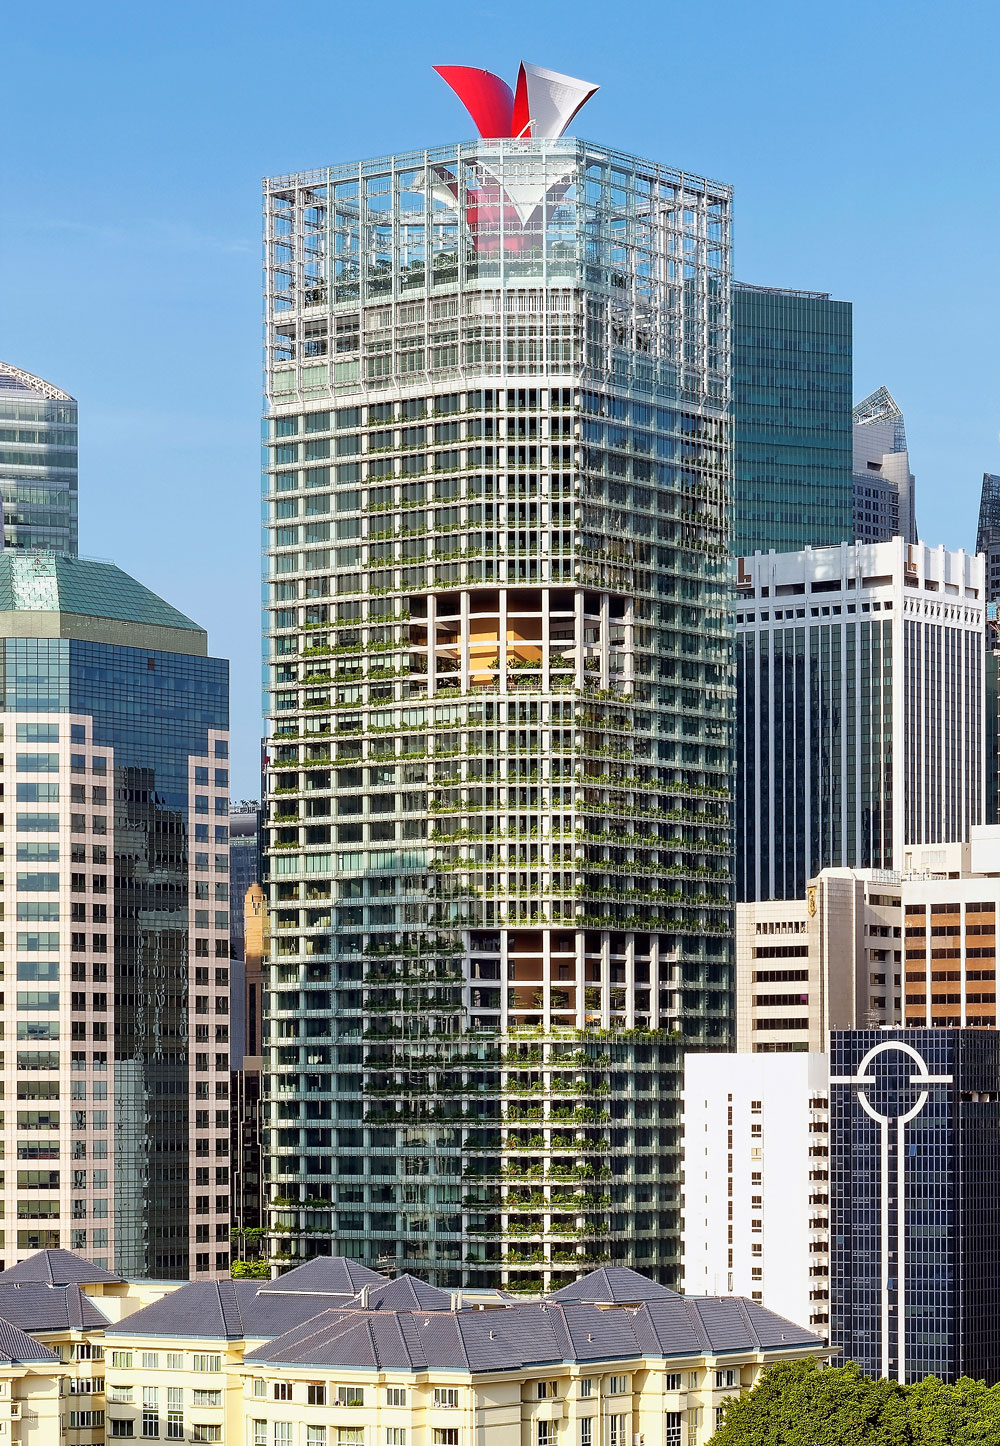 Modern high-rise façade with vertical gardens, surrounded by other skyscrapers under a blue sky.